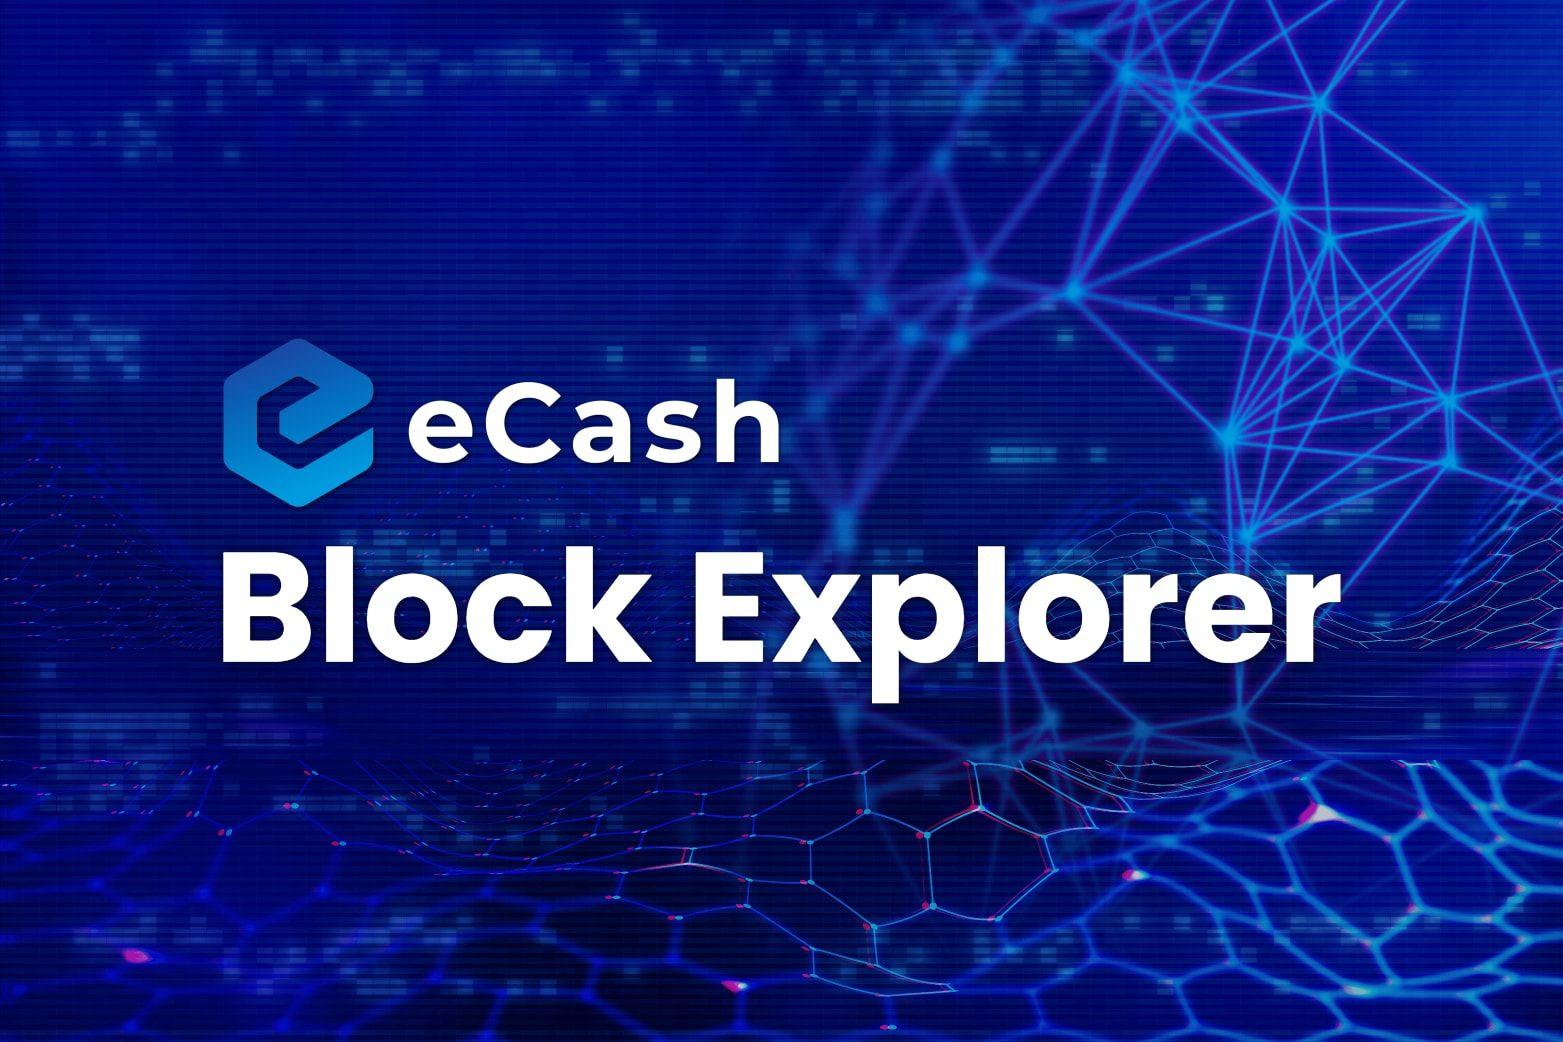 All You Need to Know About the eCash Block Explorer